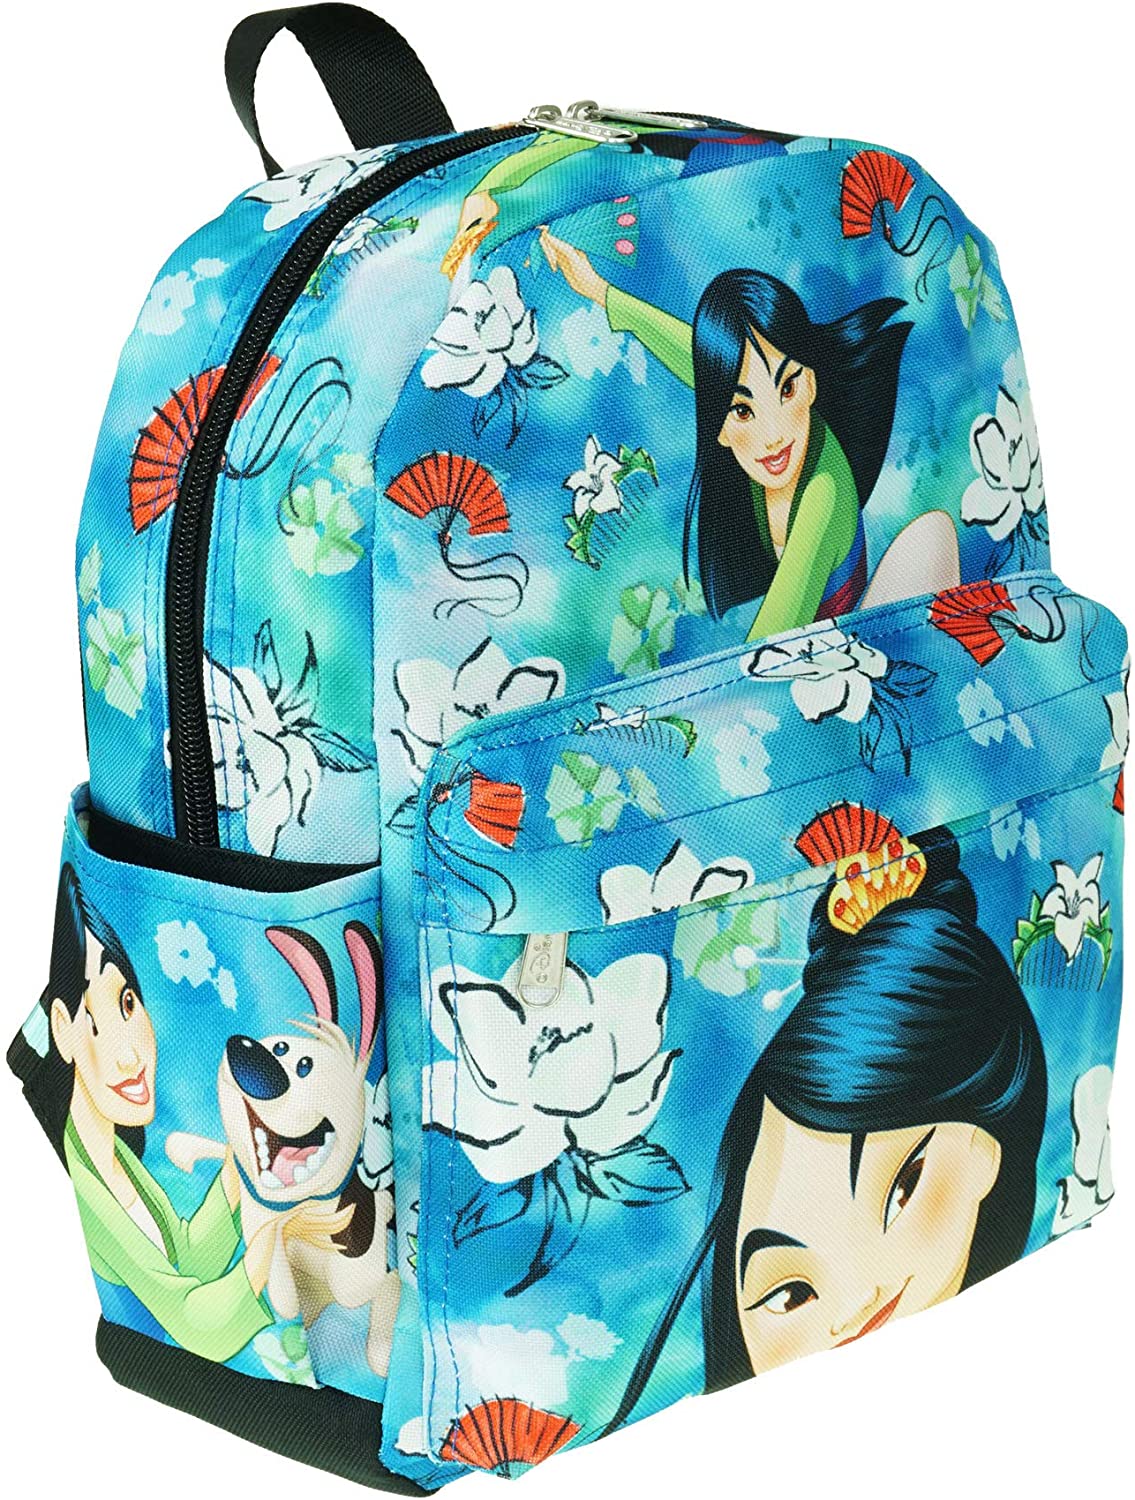 Mulan 12" Deluxe Oversize Print Daypack - A21308 - GTE Zone